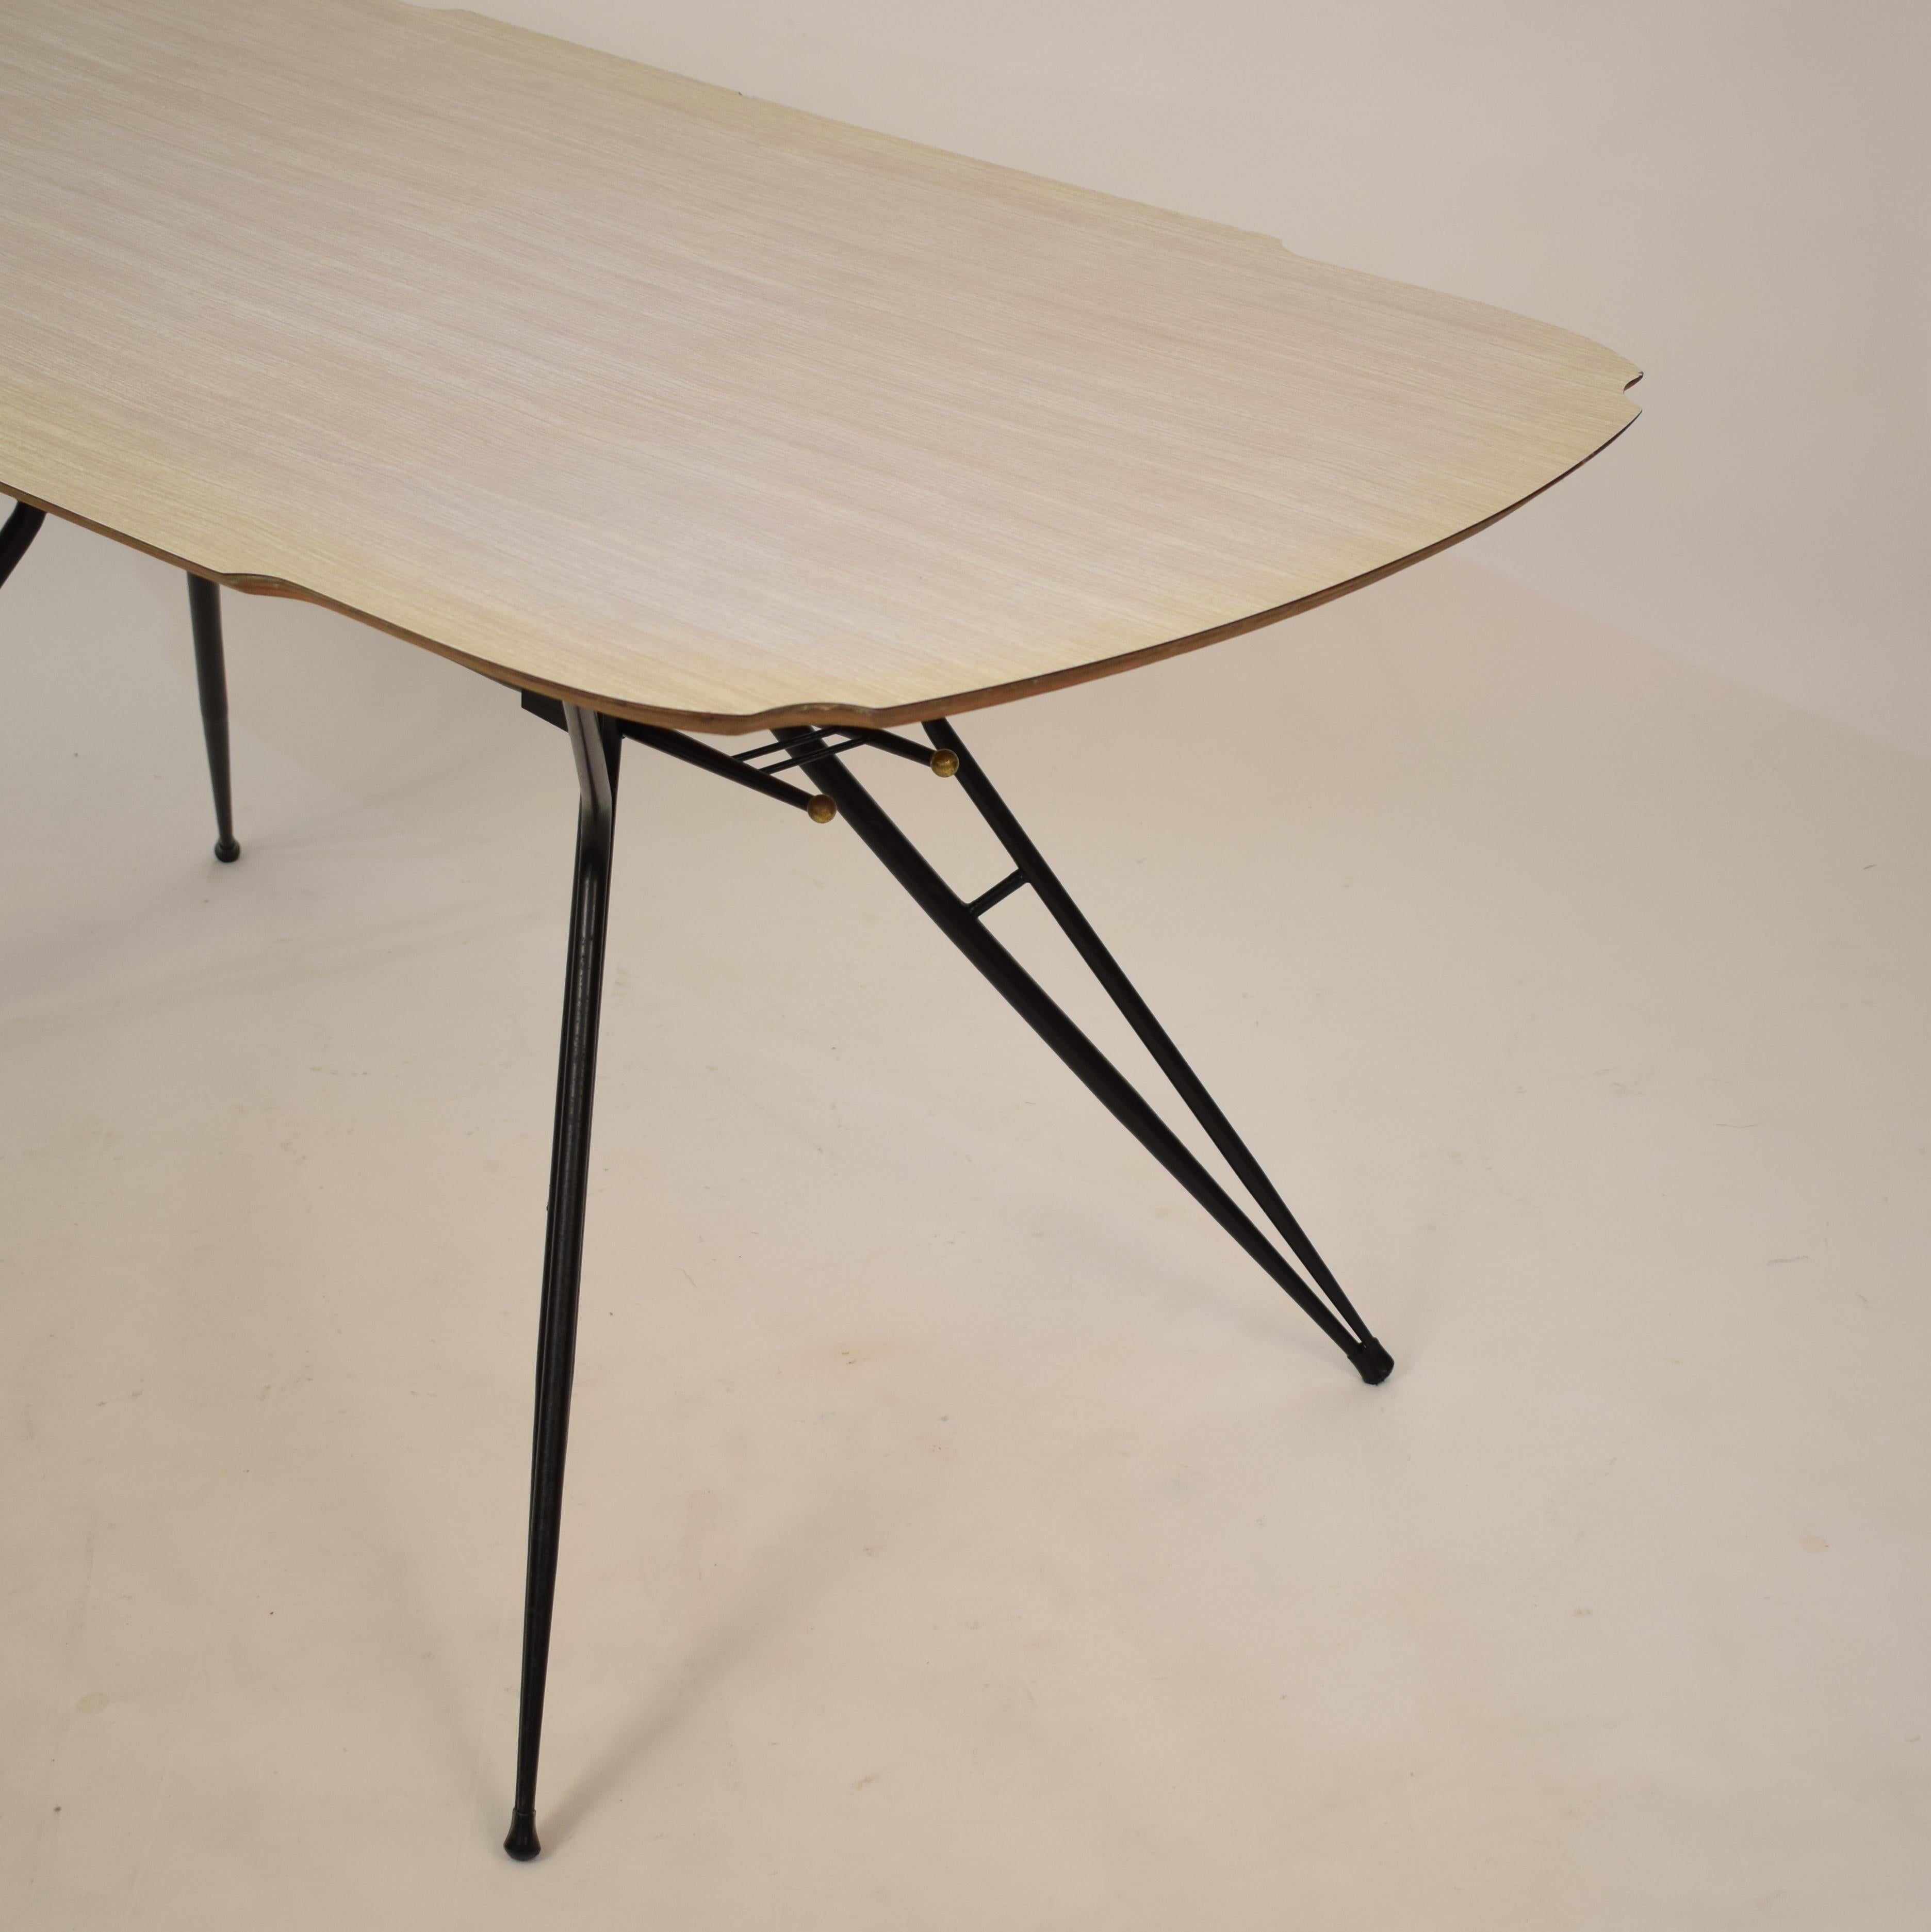 Midcentury Italian Black and White Dining Table Attributed to Ico Parisi, 1958 For Sale 4